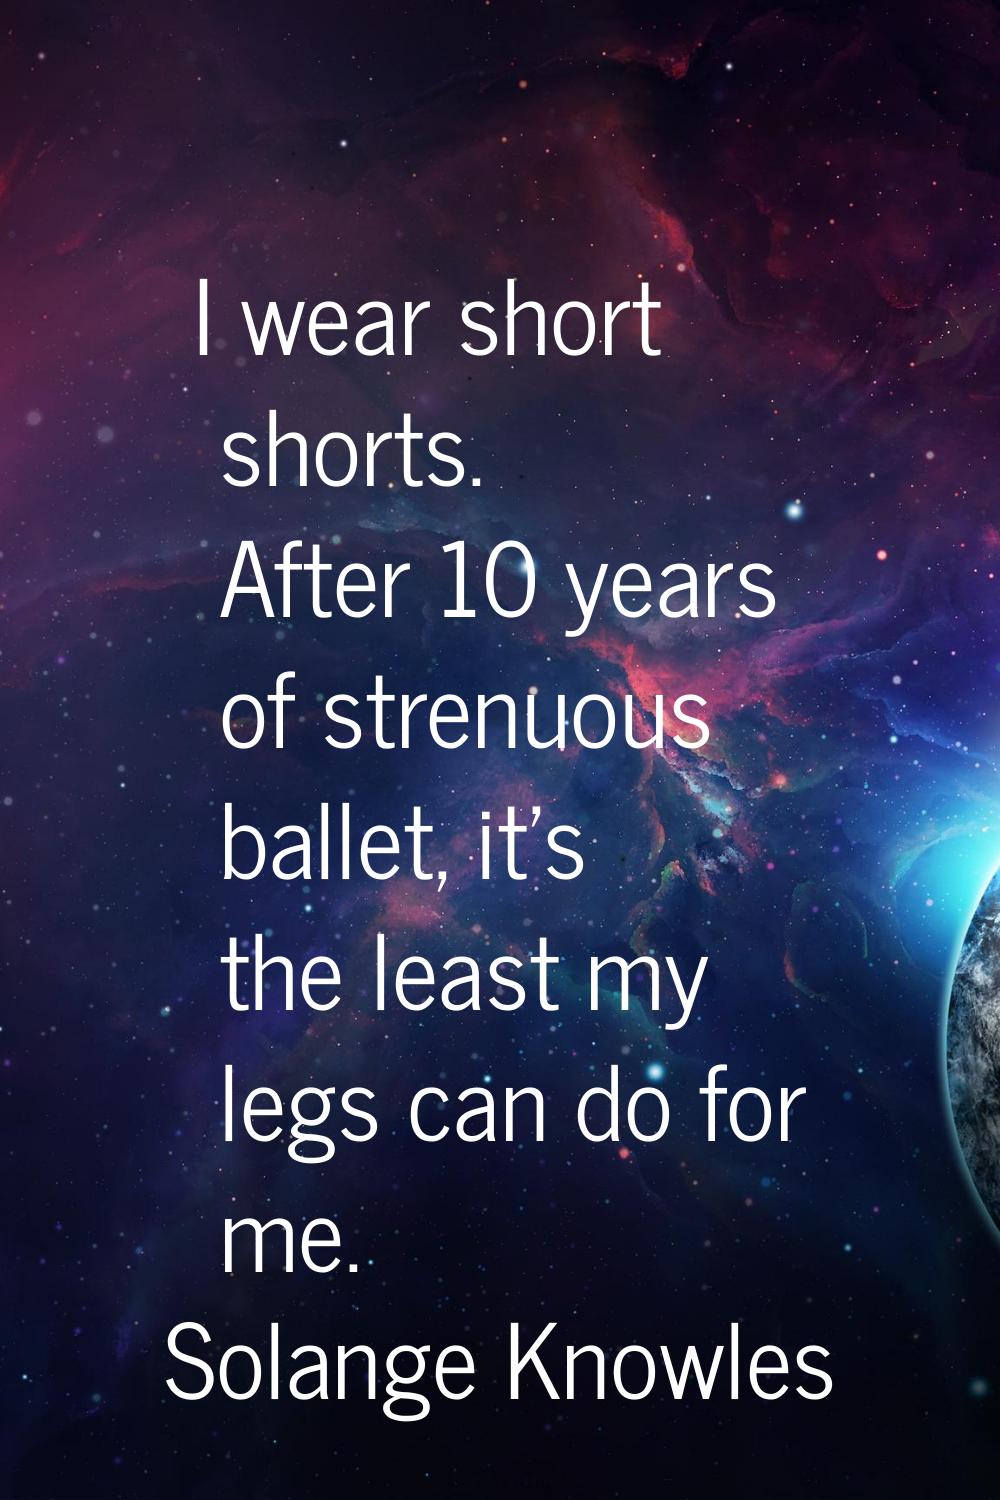 I wear short shorts. After 10 years of strenuous ballet, it's the least my legs can do for me.